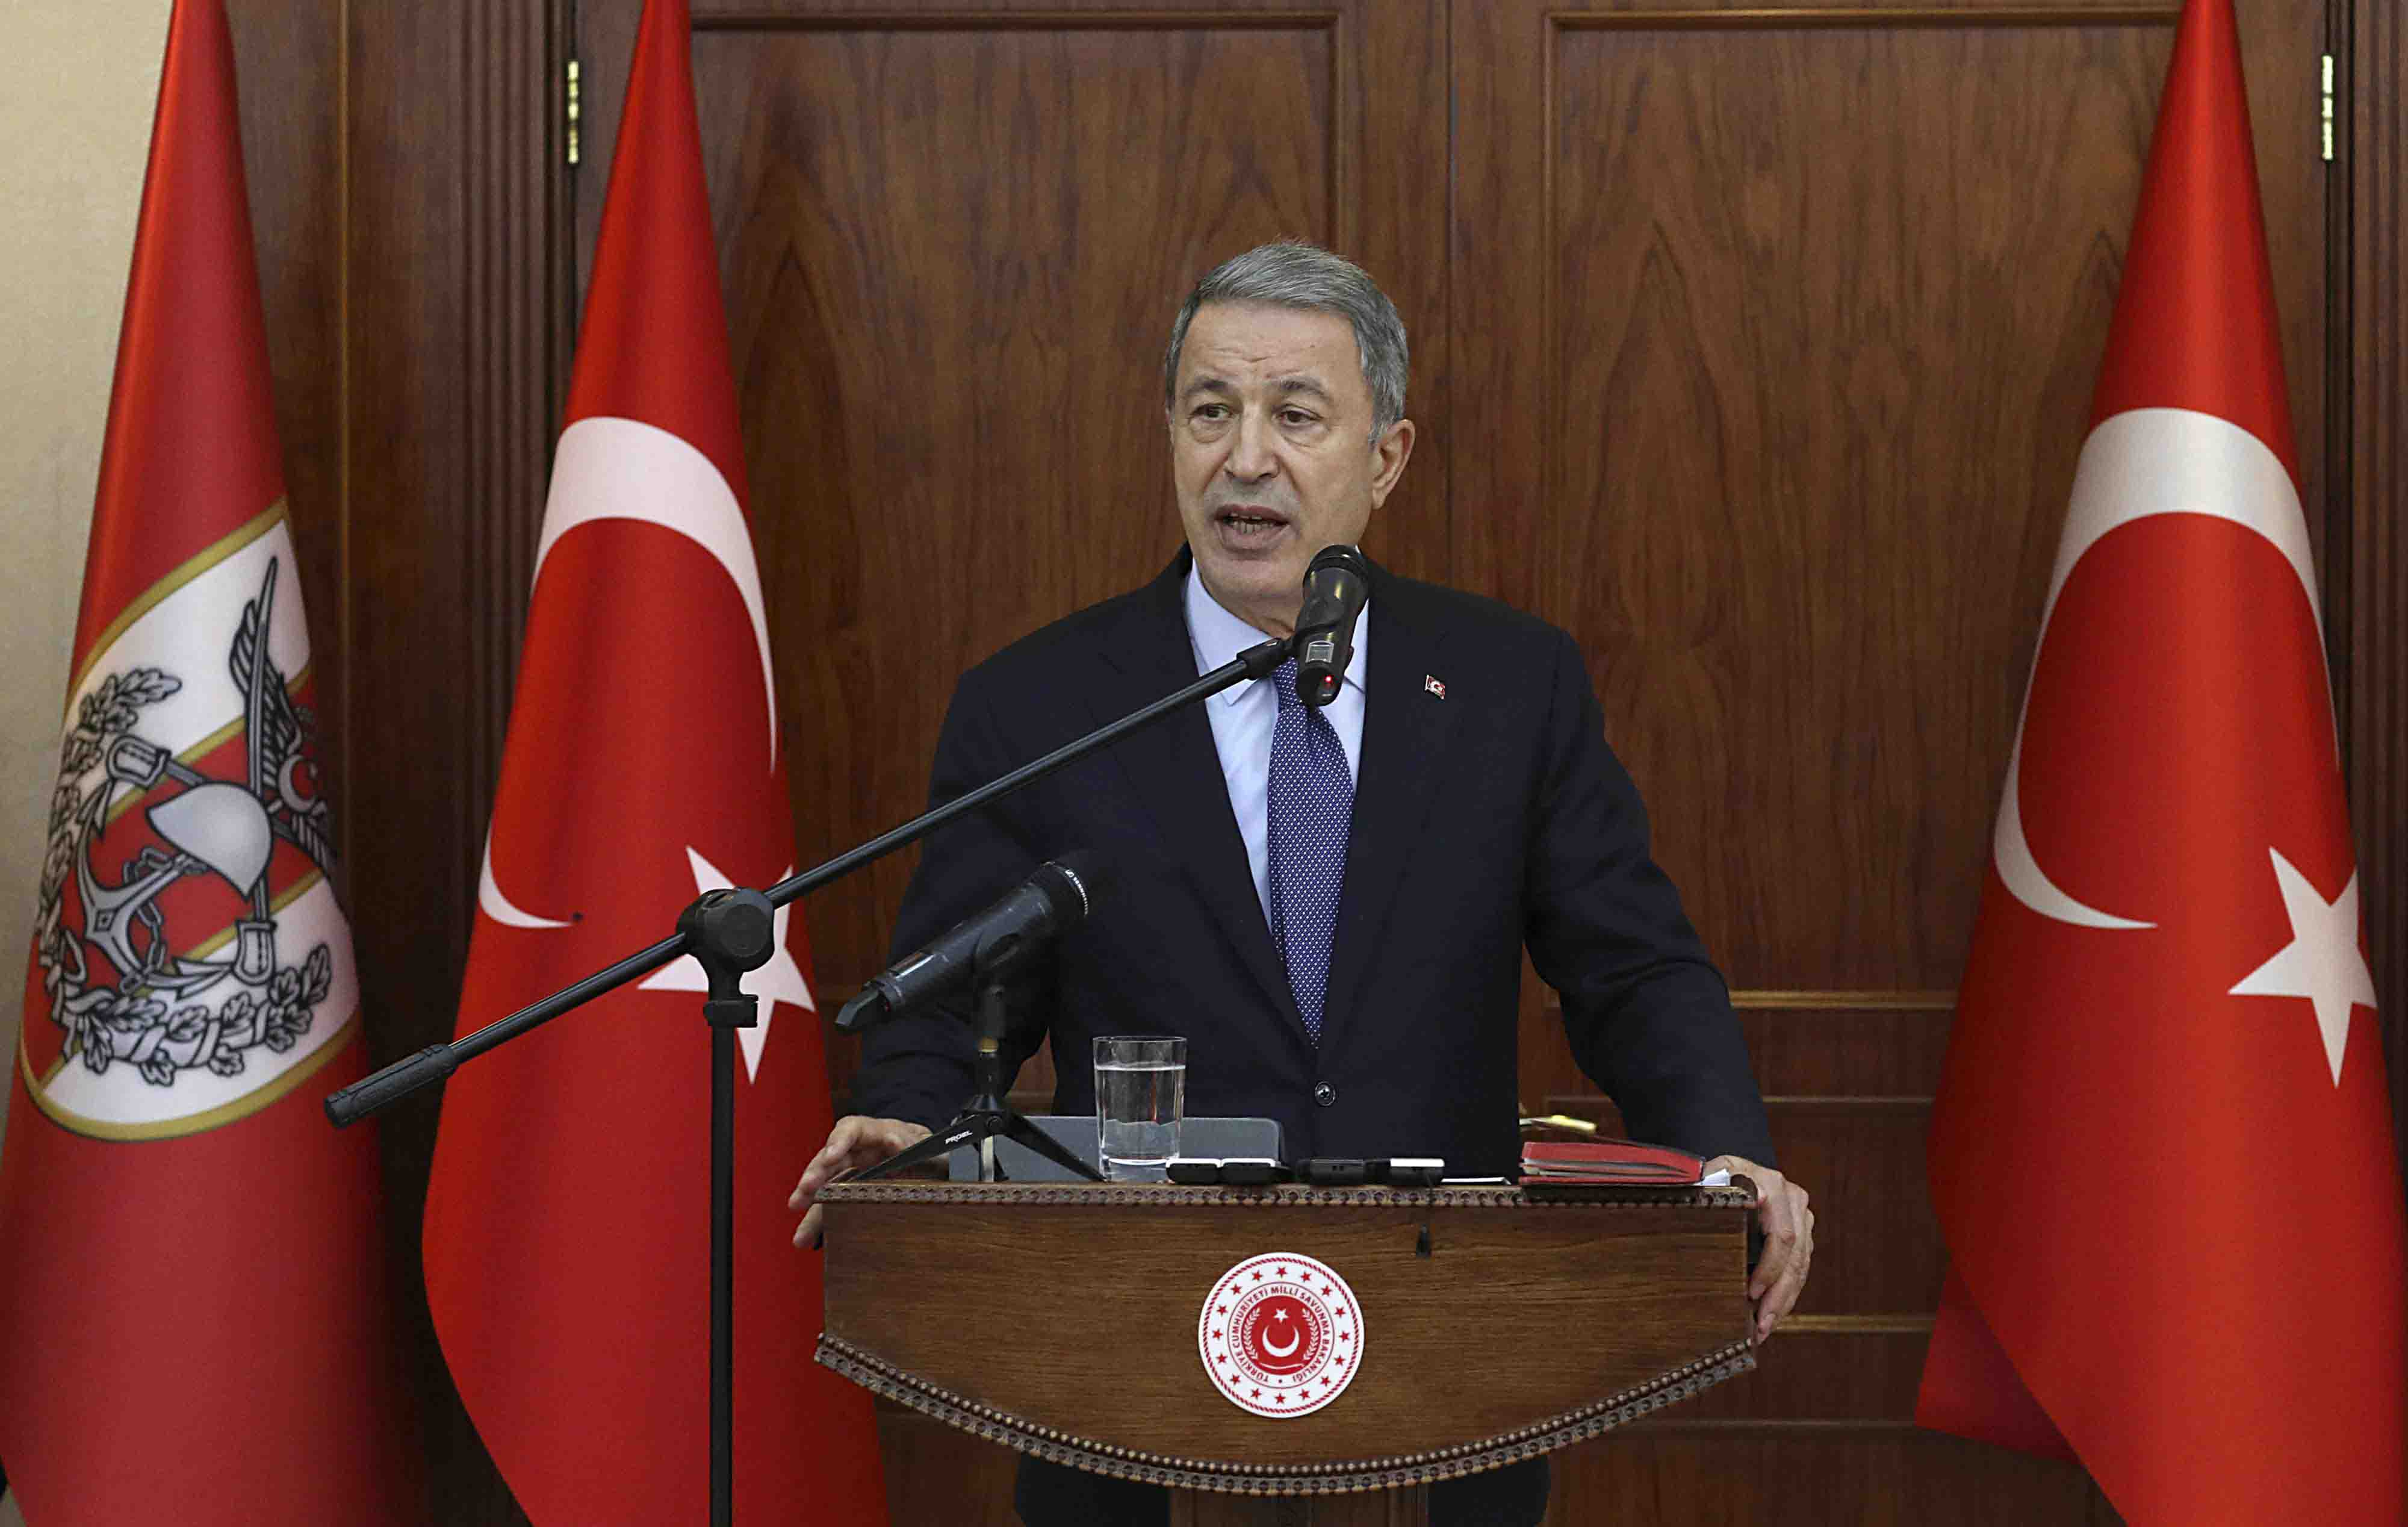 "It should be known that we have taken all kinds of measures to deal with any threat or antagonistic action against Turkey," Akar said